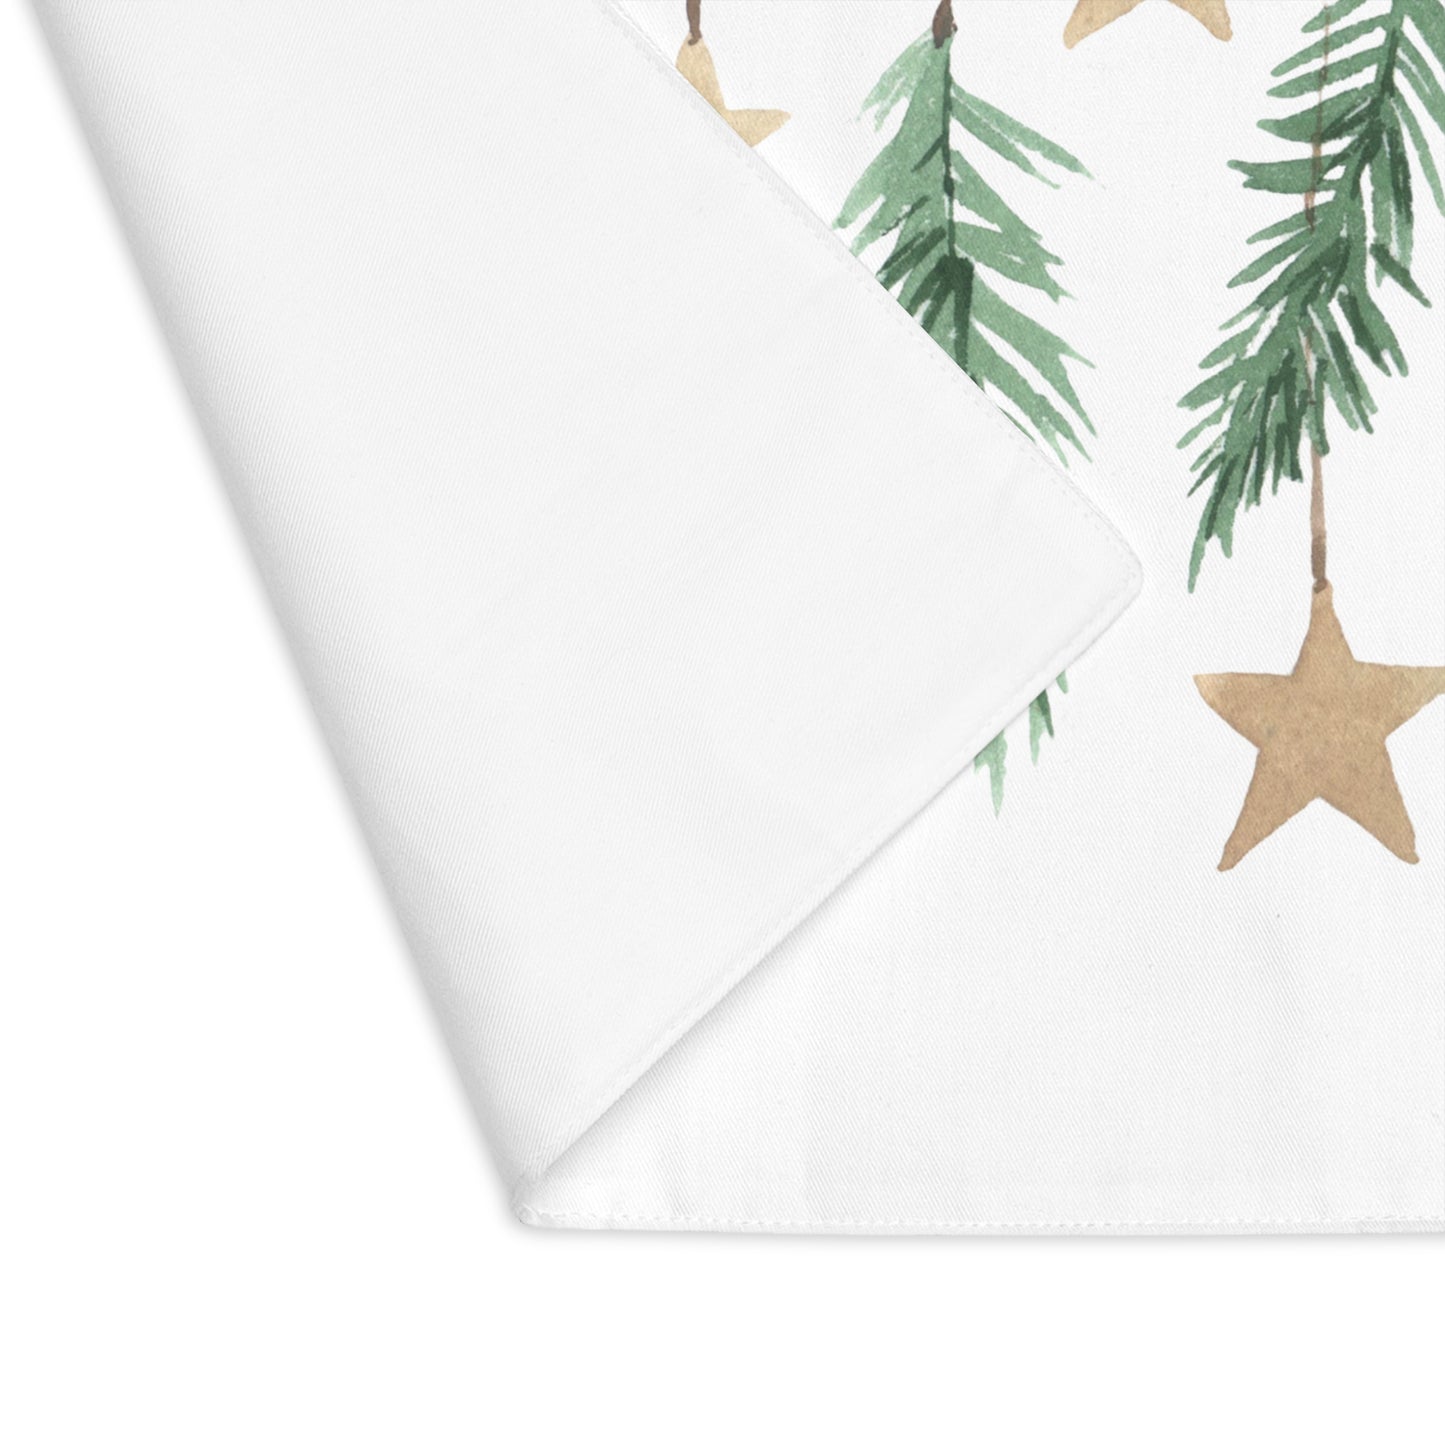 Firs and Stars on a Twig Scandinavian Christmas Placemat, 1pc